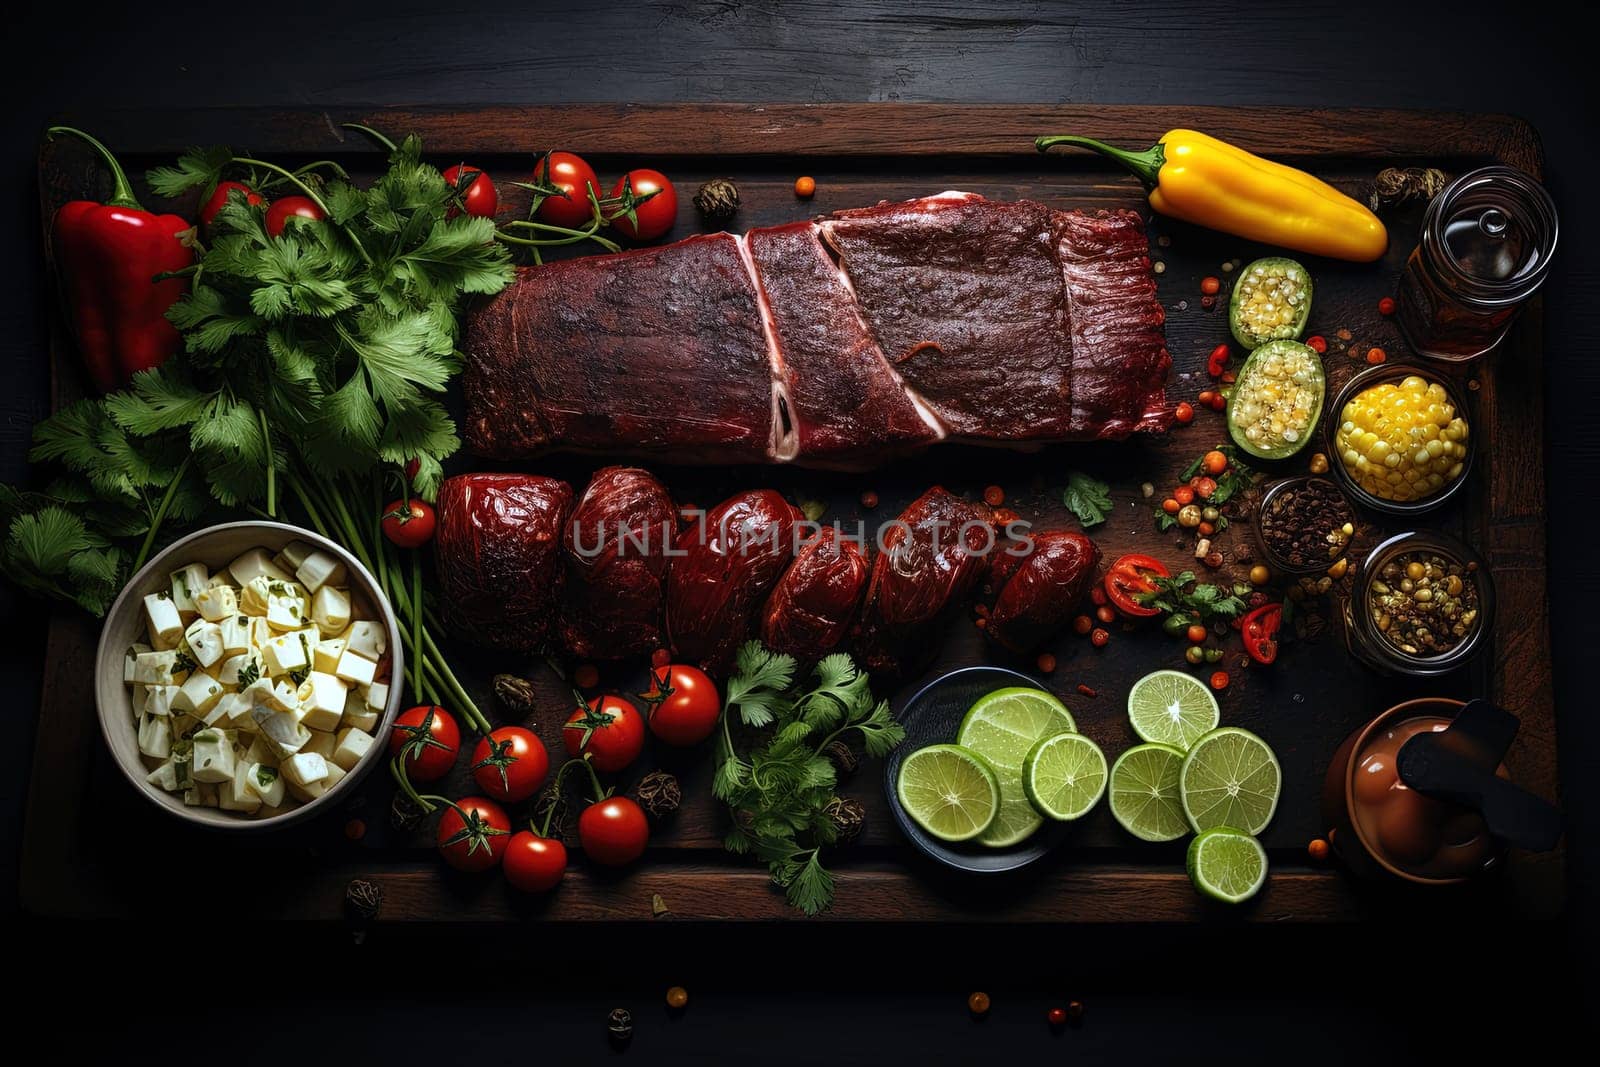 Churrasco meat dish of Latin American cuisine by Dustick